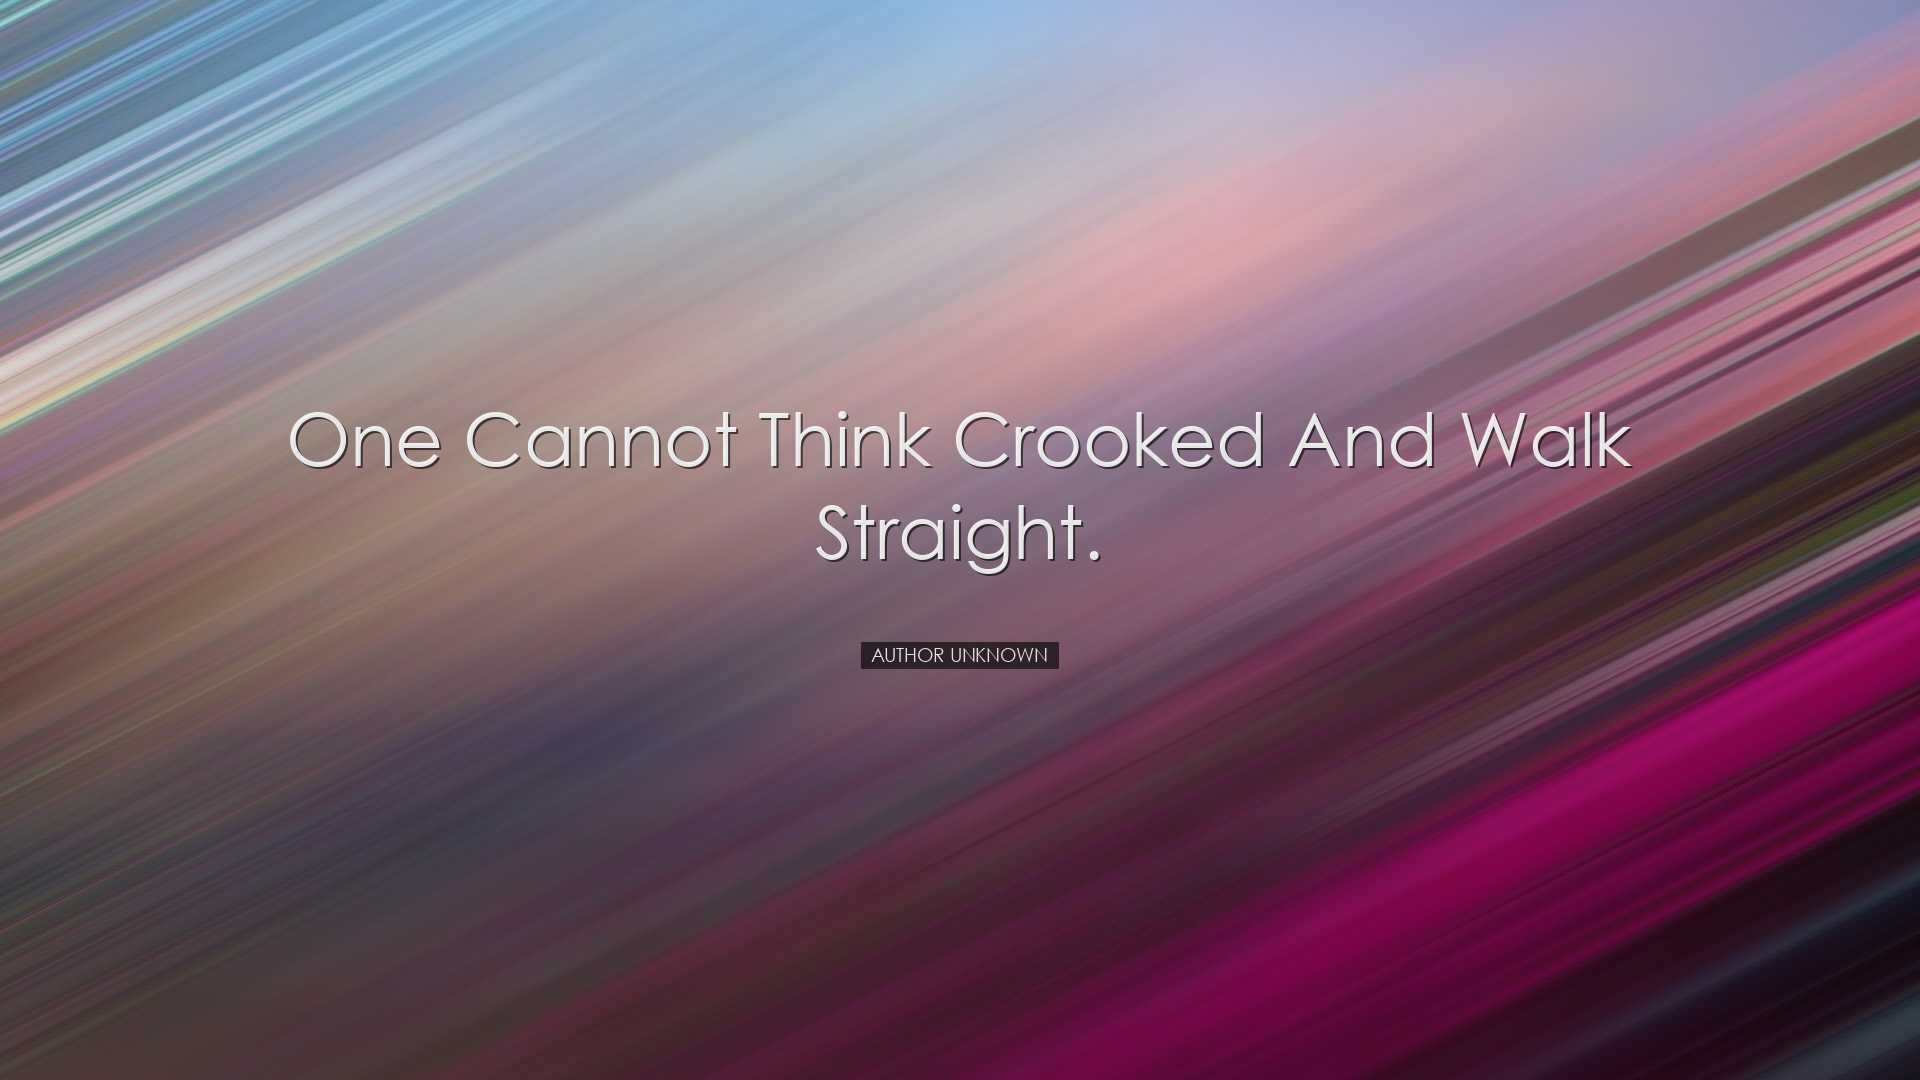 One cannot think crooked and walk straight. - Author Unknown